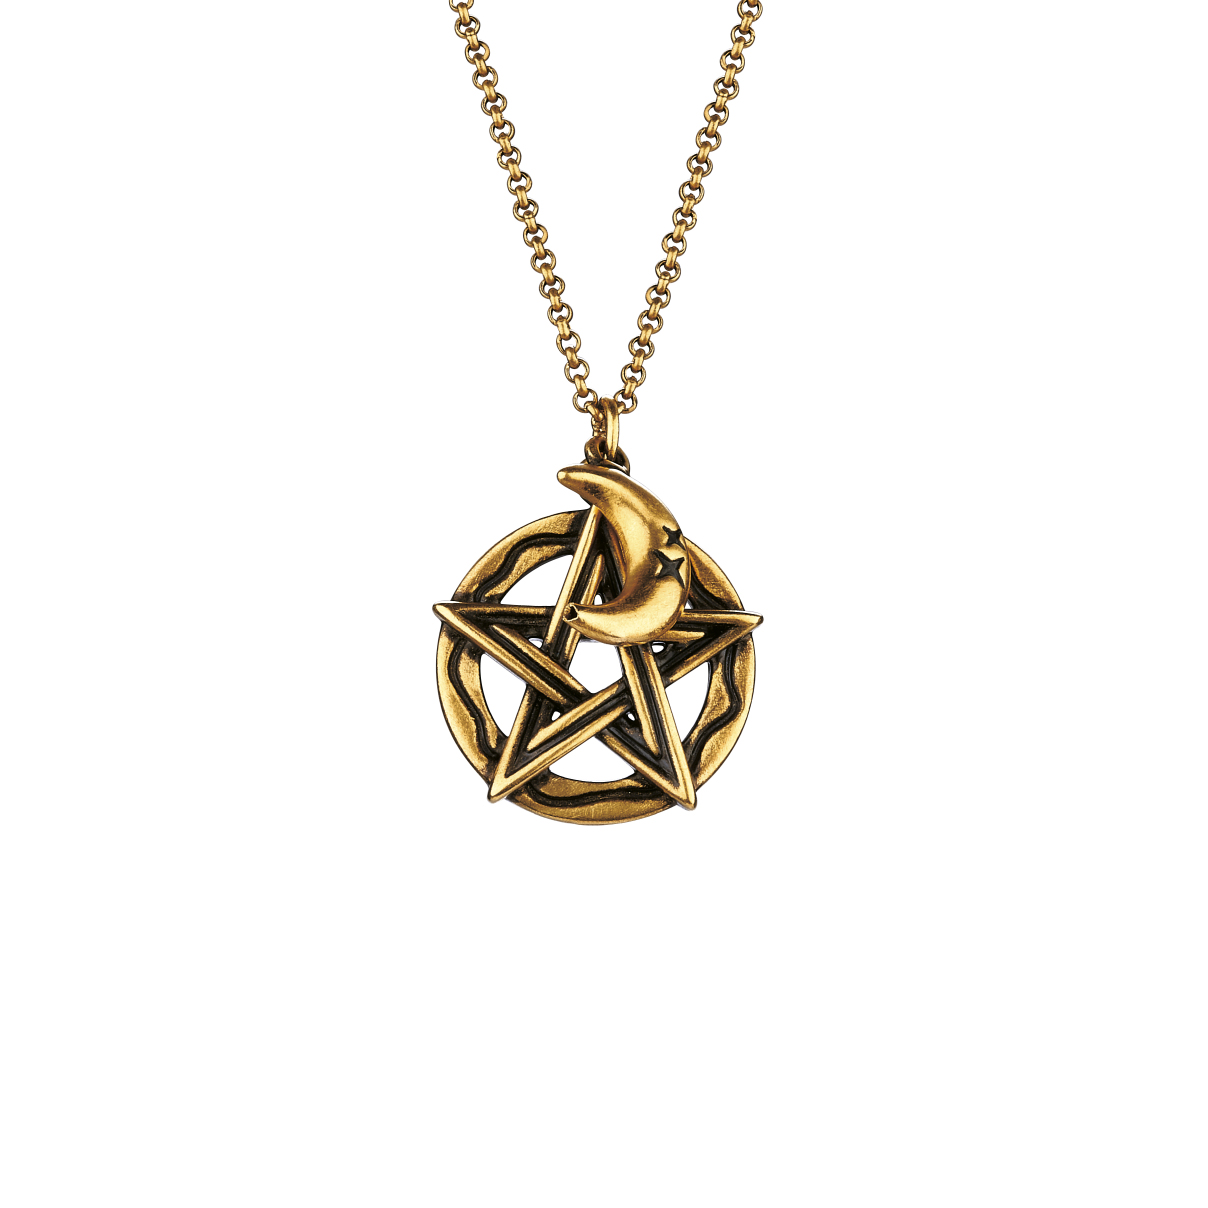 F-style Hey Cool Gold Pendant